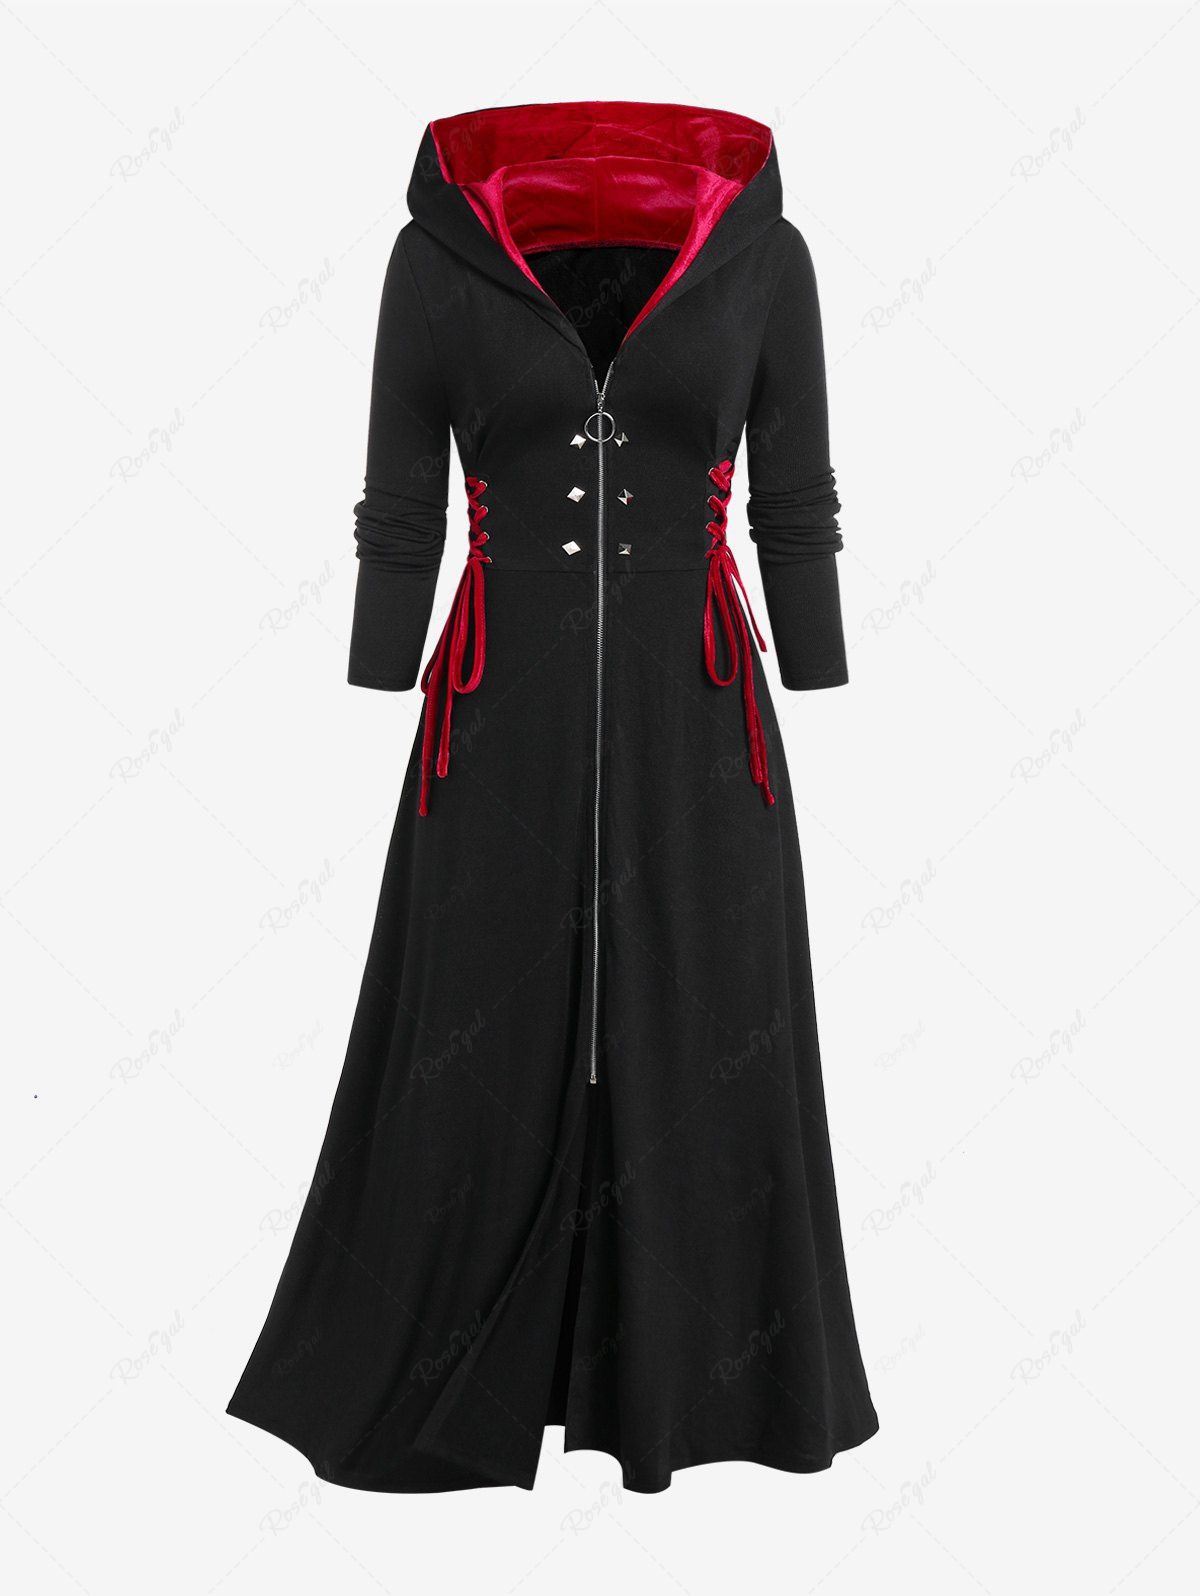 New Plus Size Hooded Lace Up Front Zipper Maxi Coat  